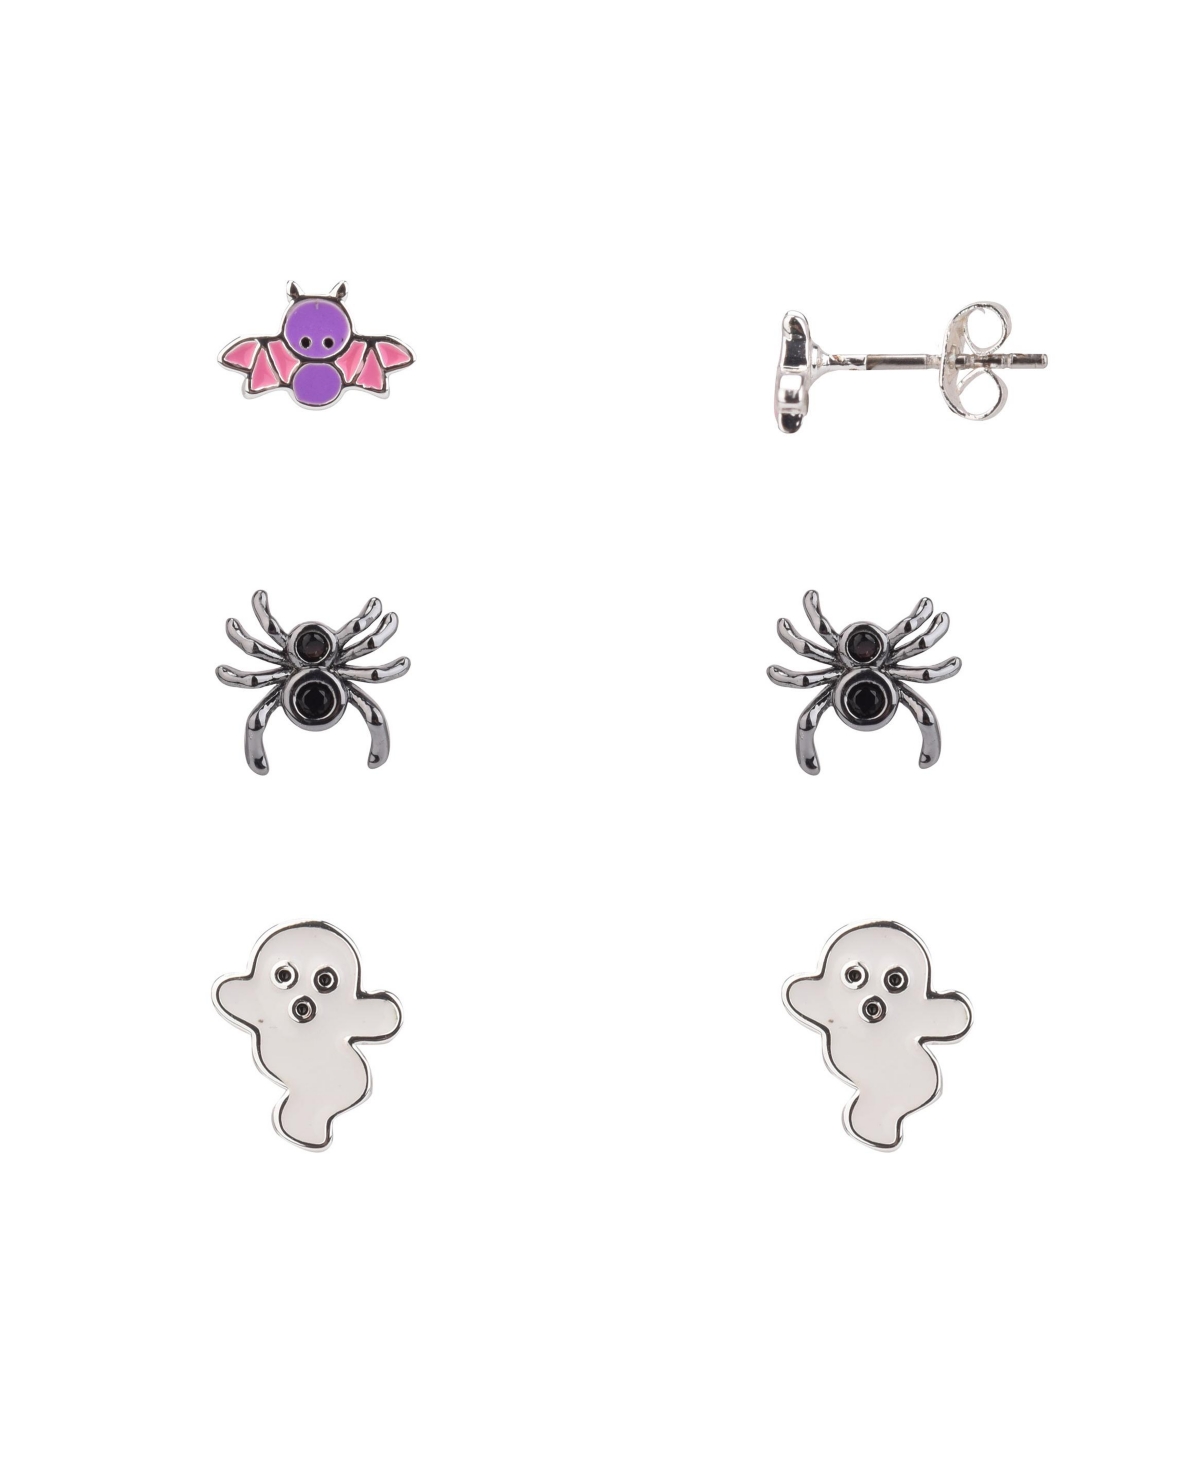 Fao Schwarz Spider, Ghost And Bat Trio Earring Set, 6 Pieces In Multi